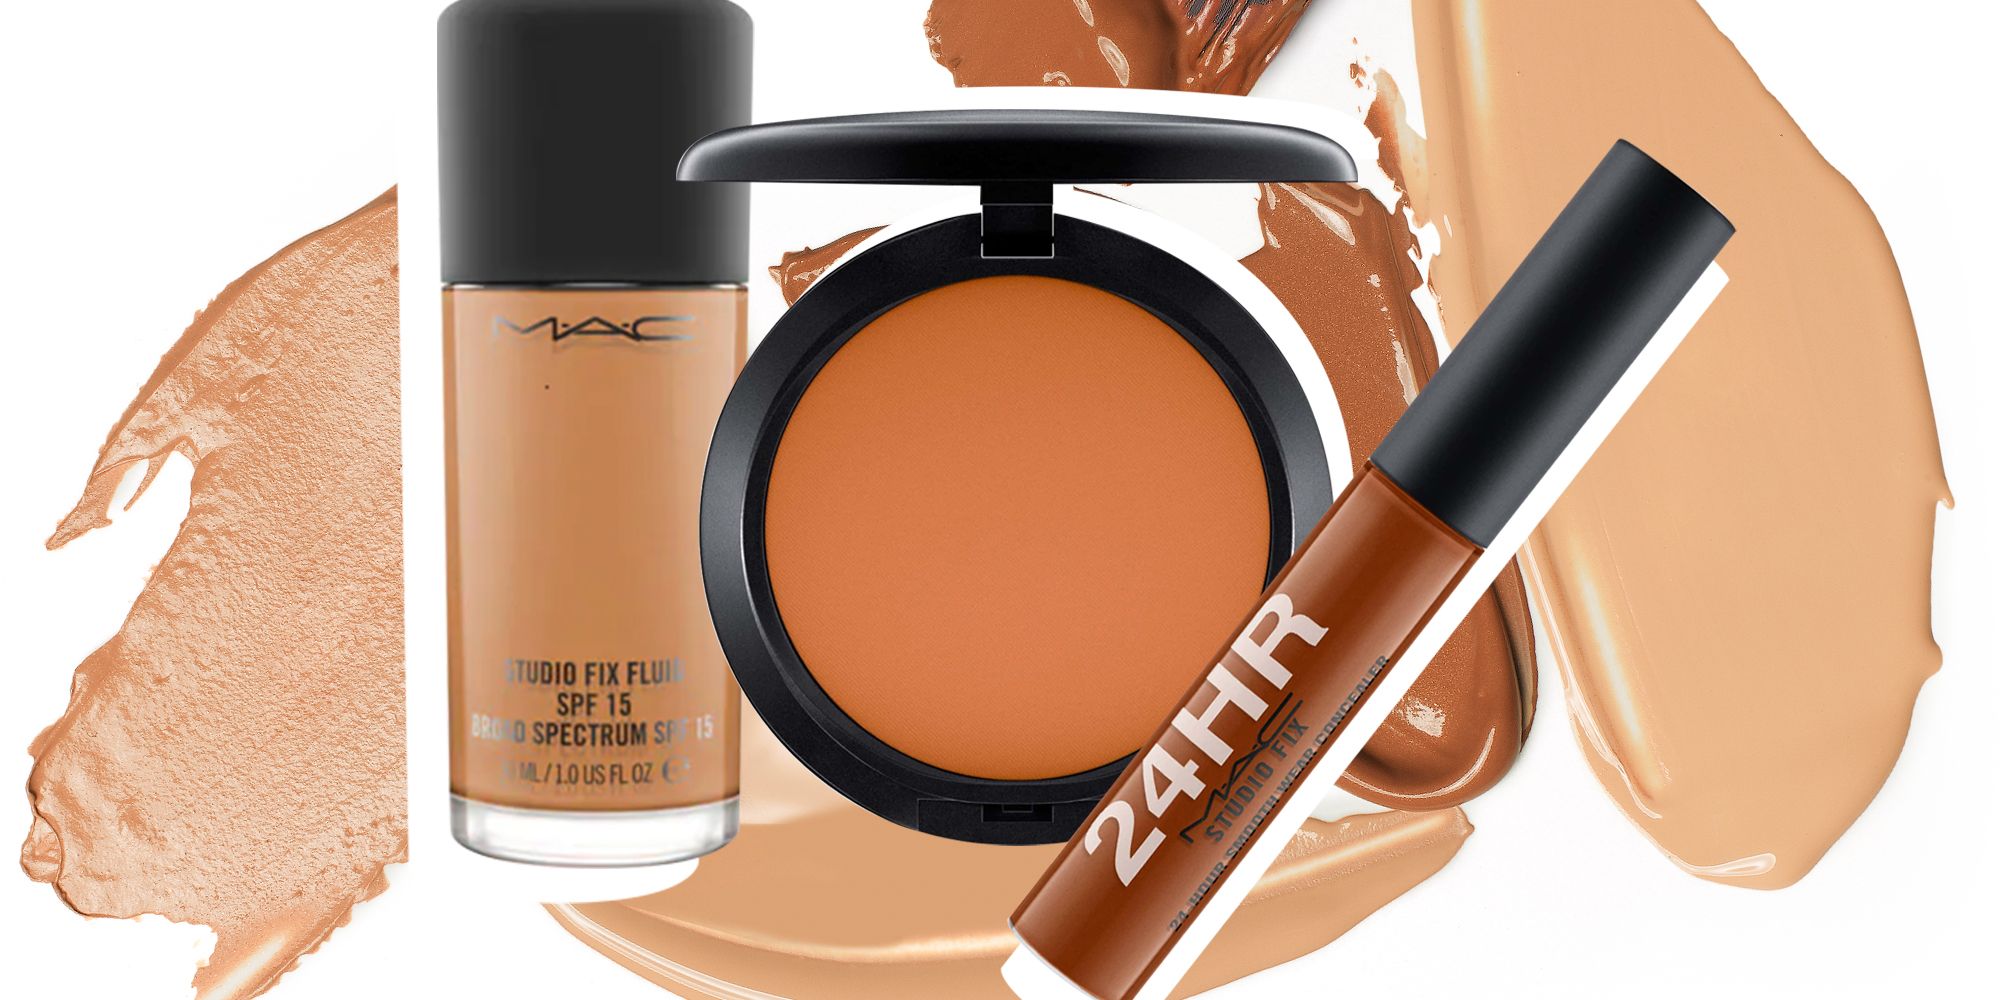 . Cosmetics Expanded Their Studio Fix Foundation and Concealer Shade  Range